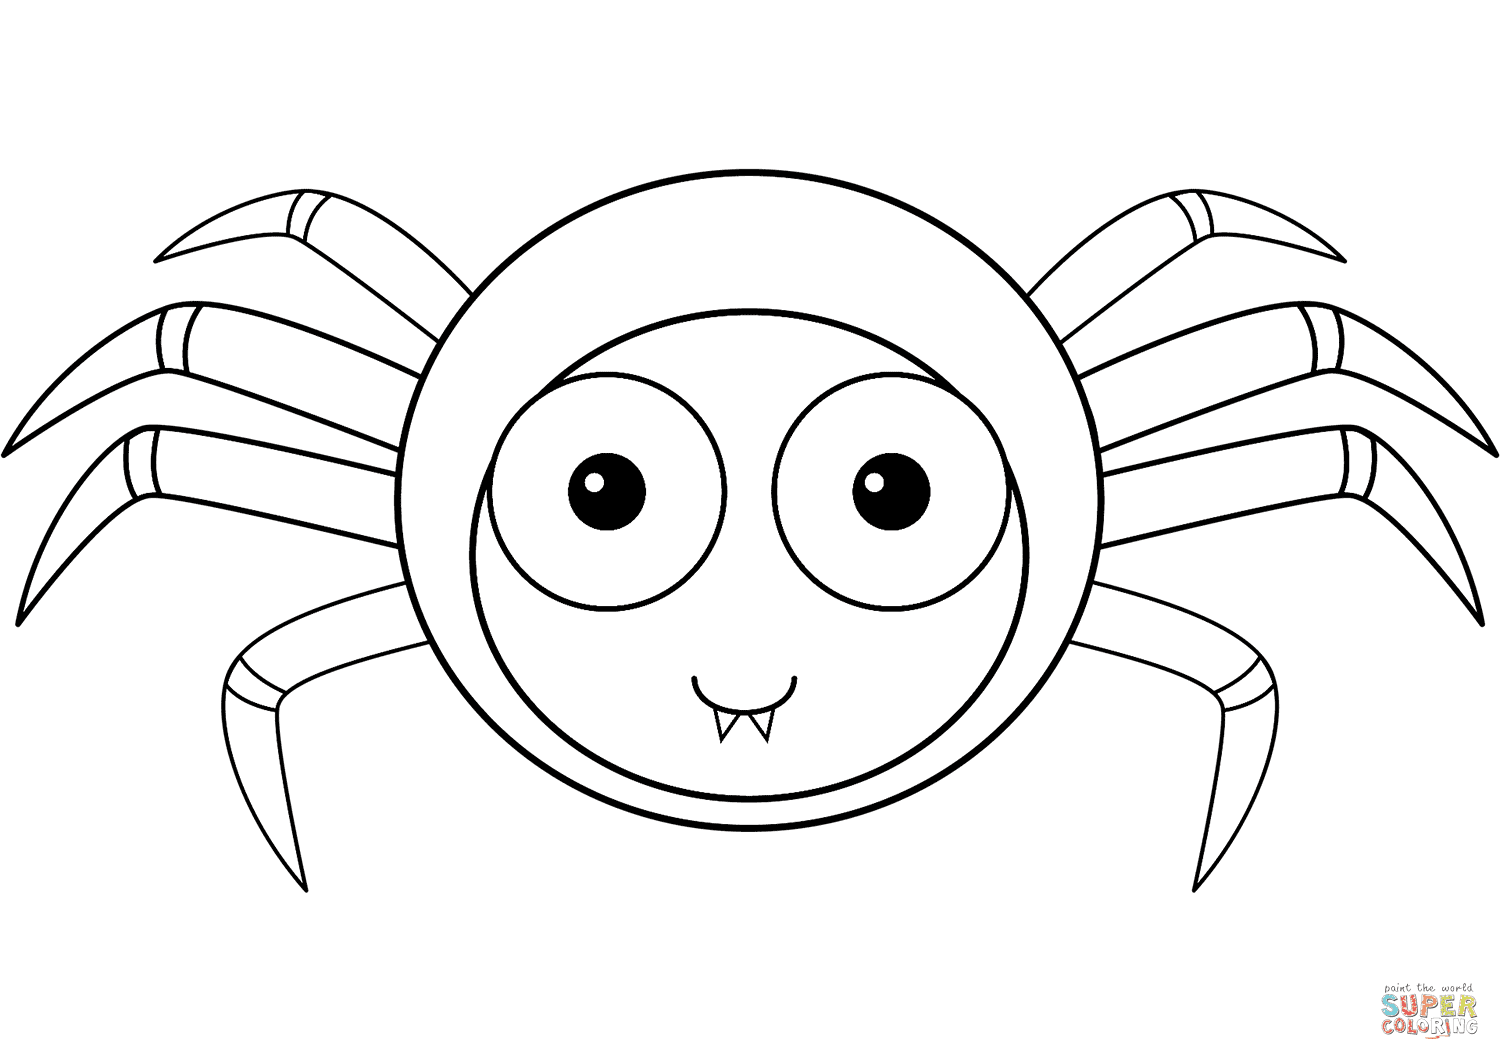 Cute Cartoon Spider Free Coloring Page